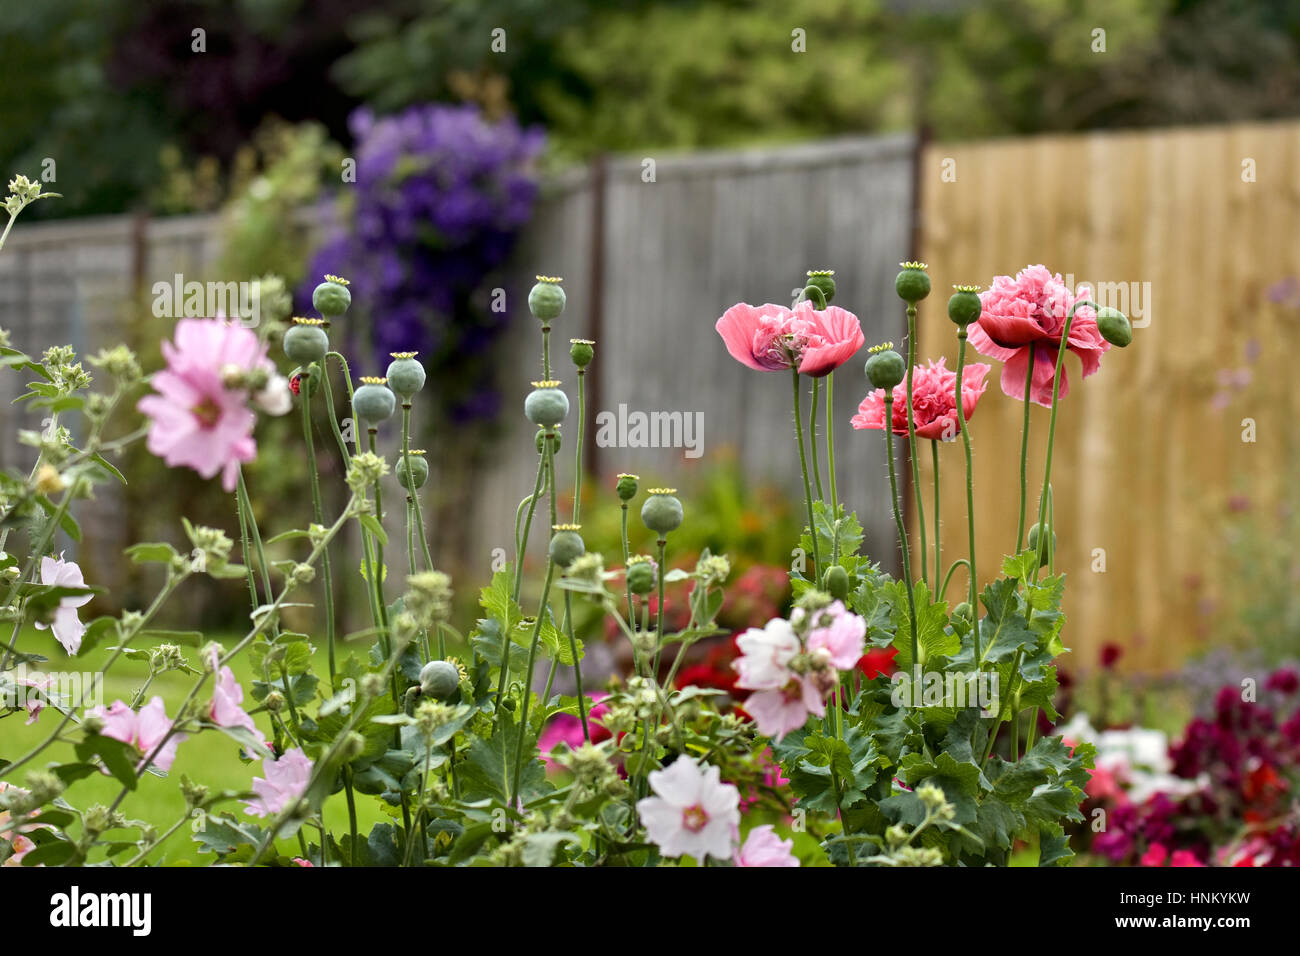 Double headed poppies and lavatera flowers in garden Stock Photo